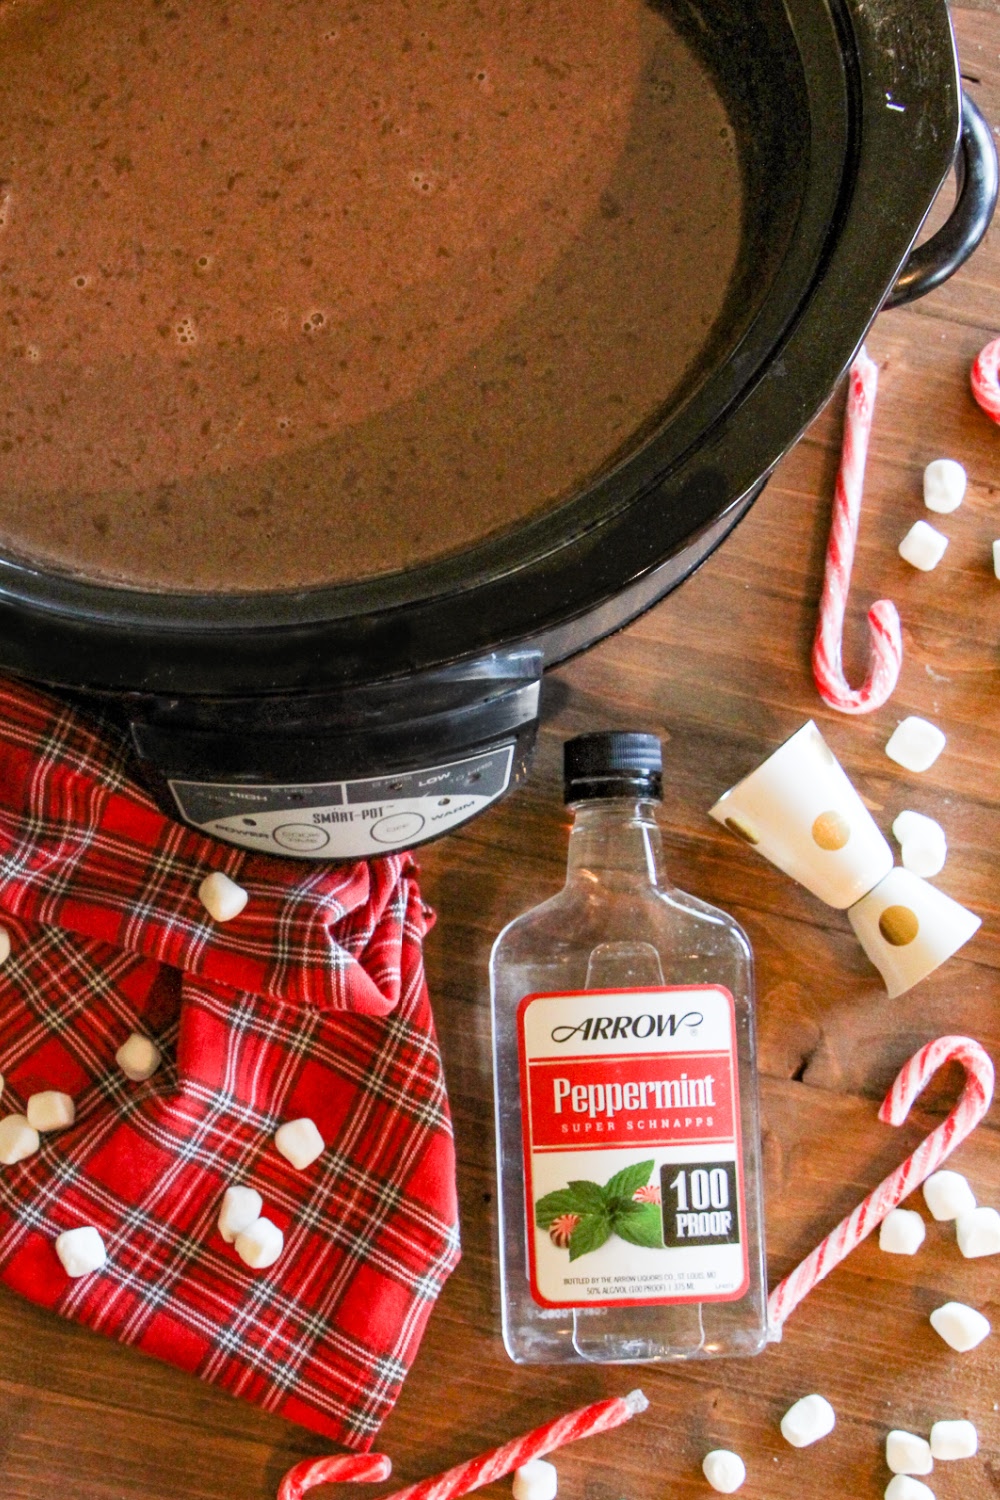 Slow cooker filled with hot chocolate shown with jigger and bottle of peppermint schnapps